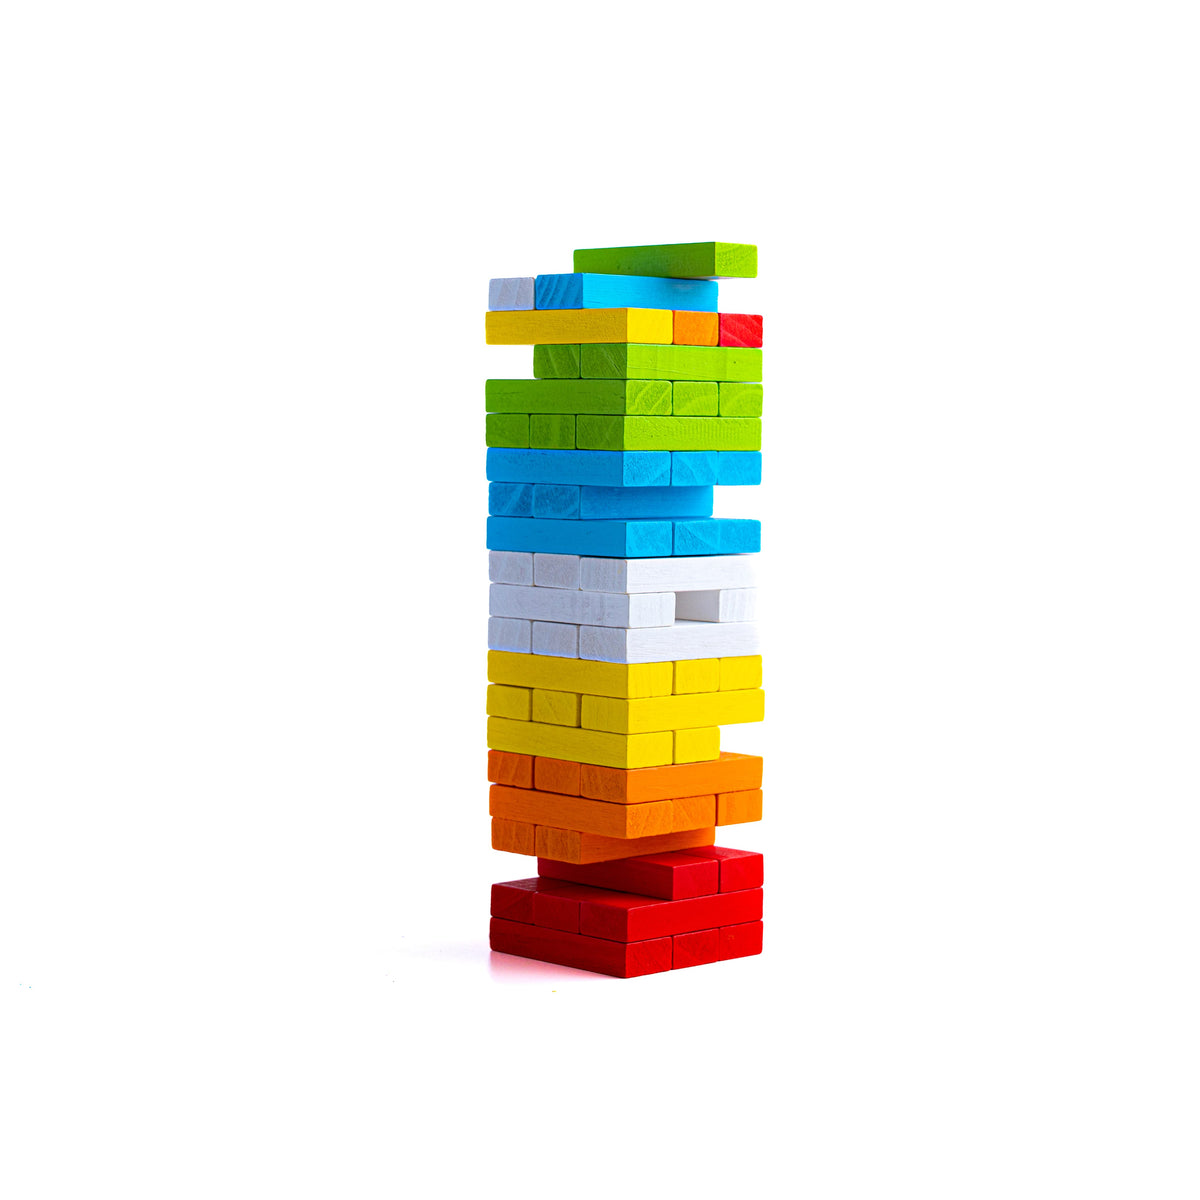 Tumbling Tower to Learn Spanish and English Color Names - Feppy